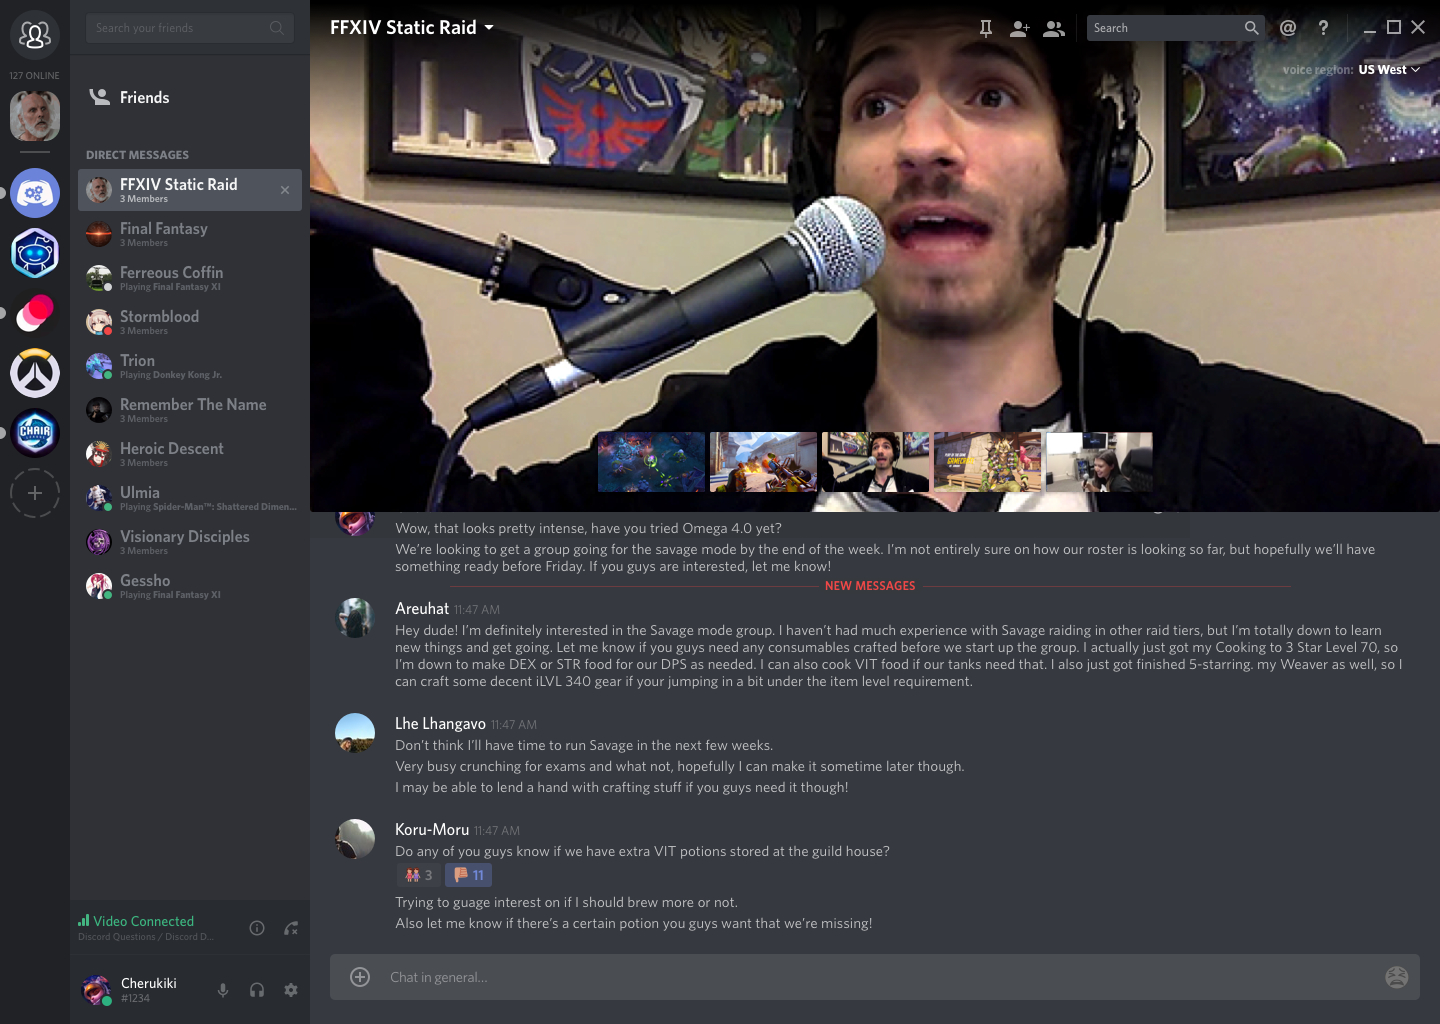 Discord chat below a stream and video chat